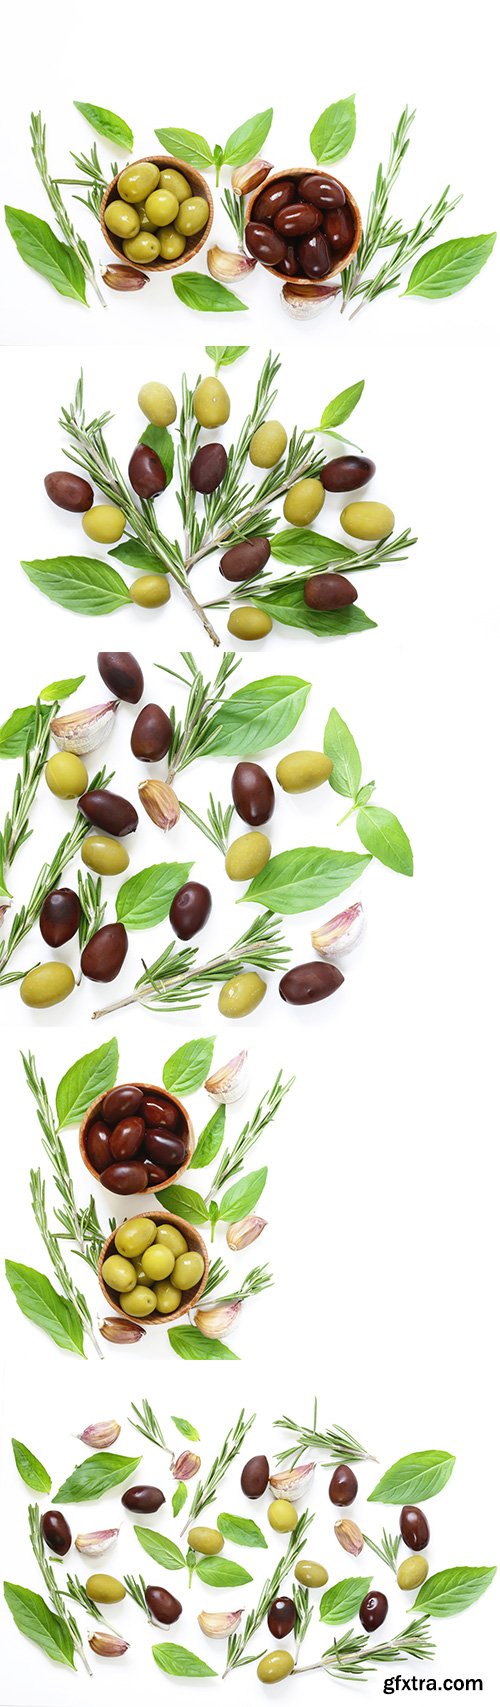 Black And Green Olives With Herbs And Spices Isolated - 7xJPGs